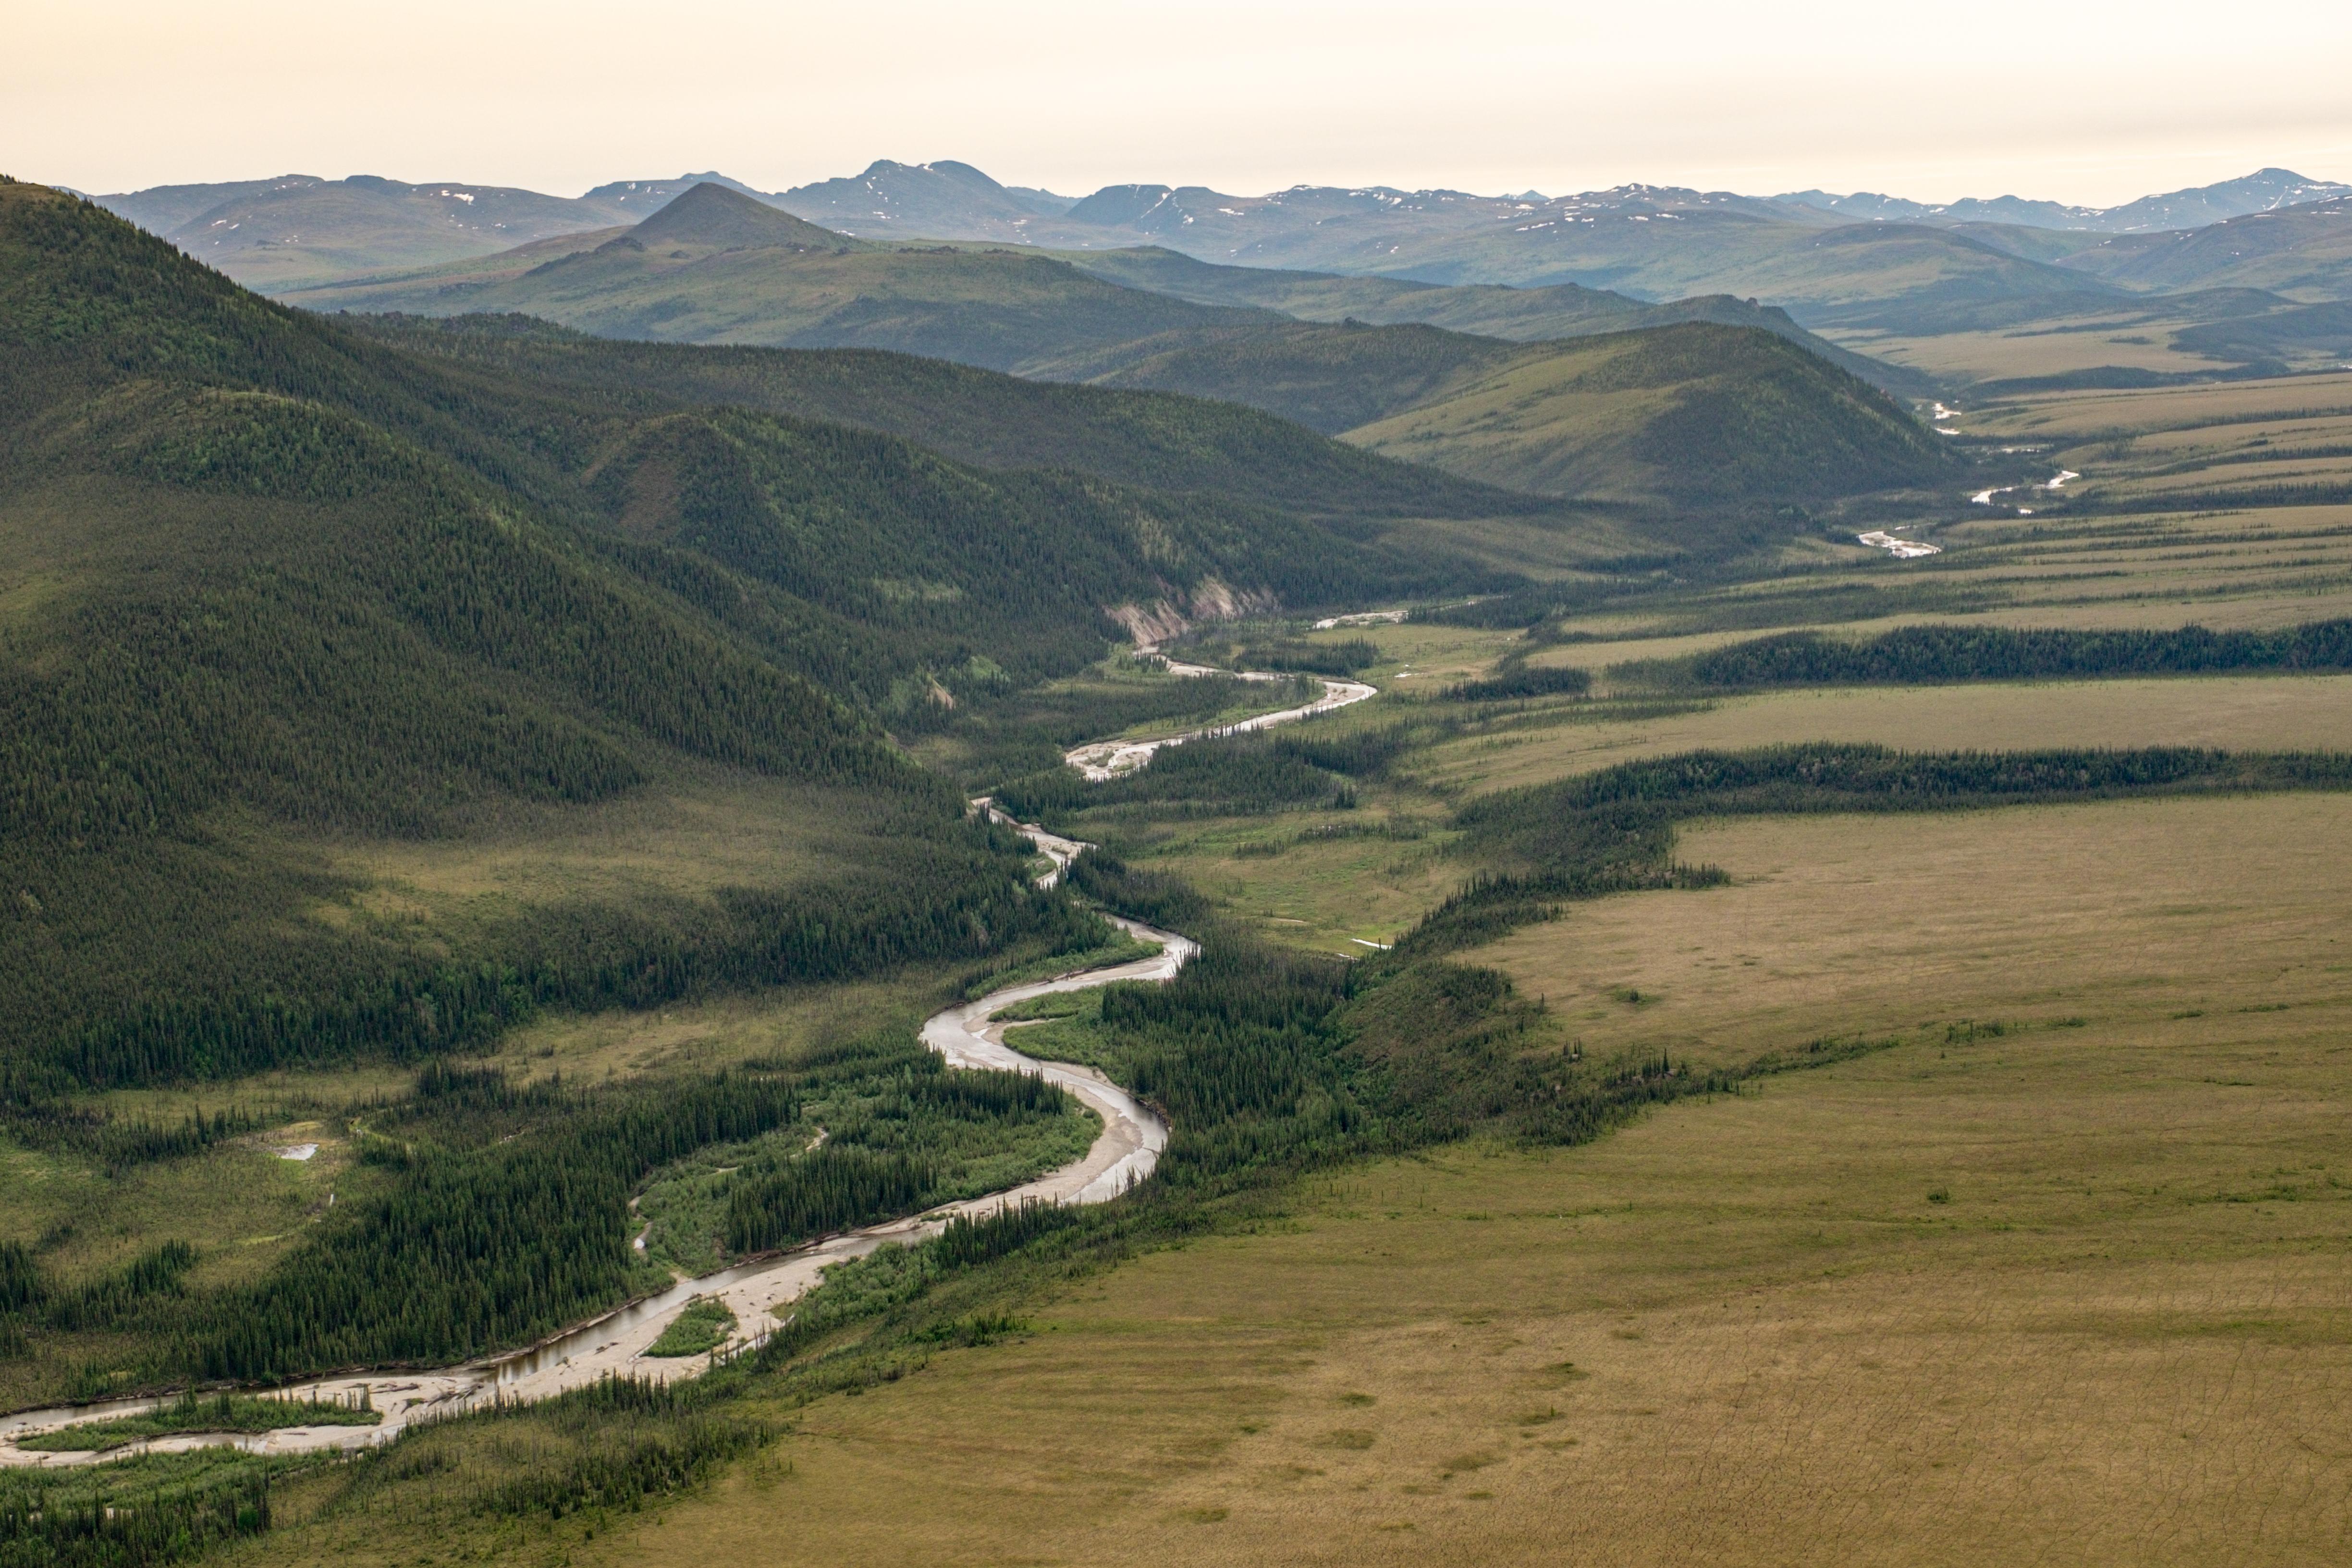 Aerial view of the Charley River winding through the tundra and mountains